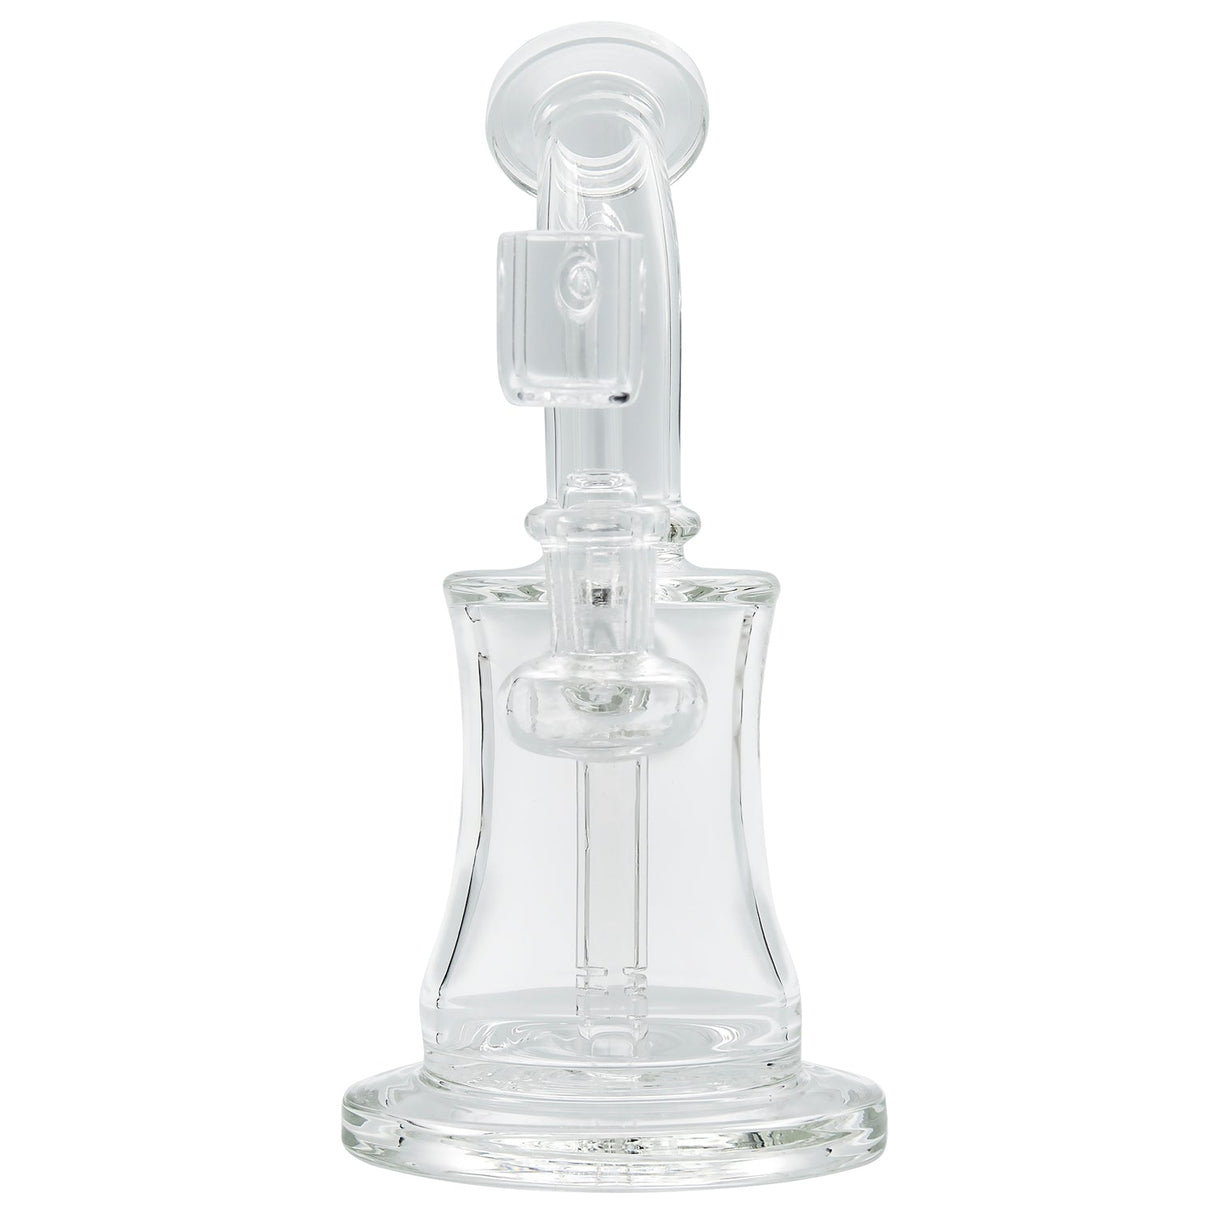 Glassic Crystal Palace Banger Hanger Dab Rig, Female Joint, Front View on White Background